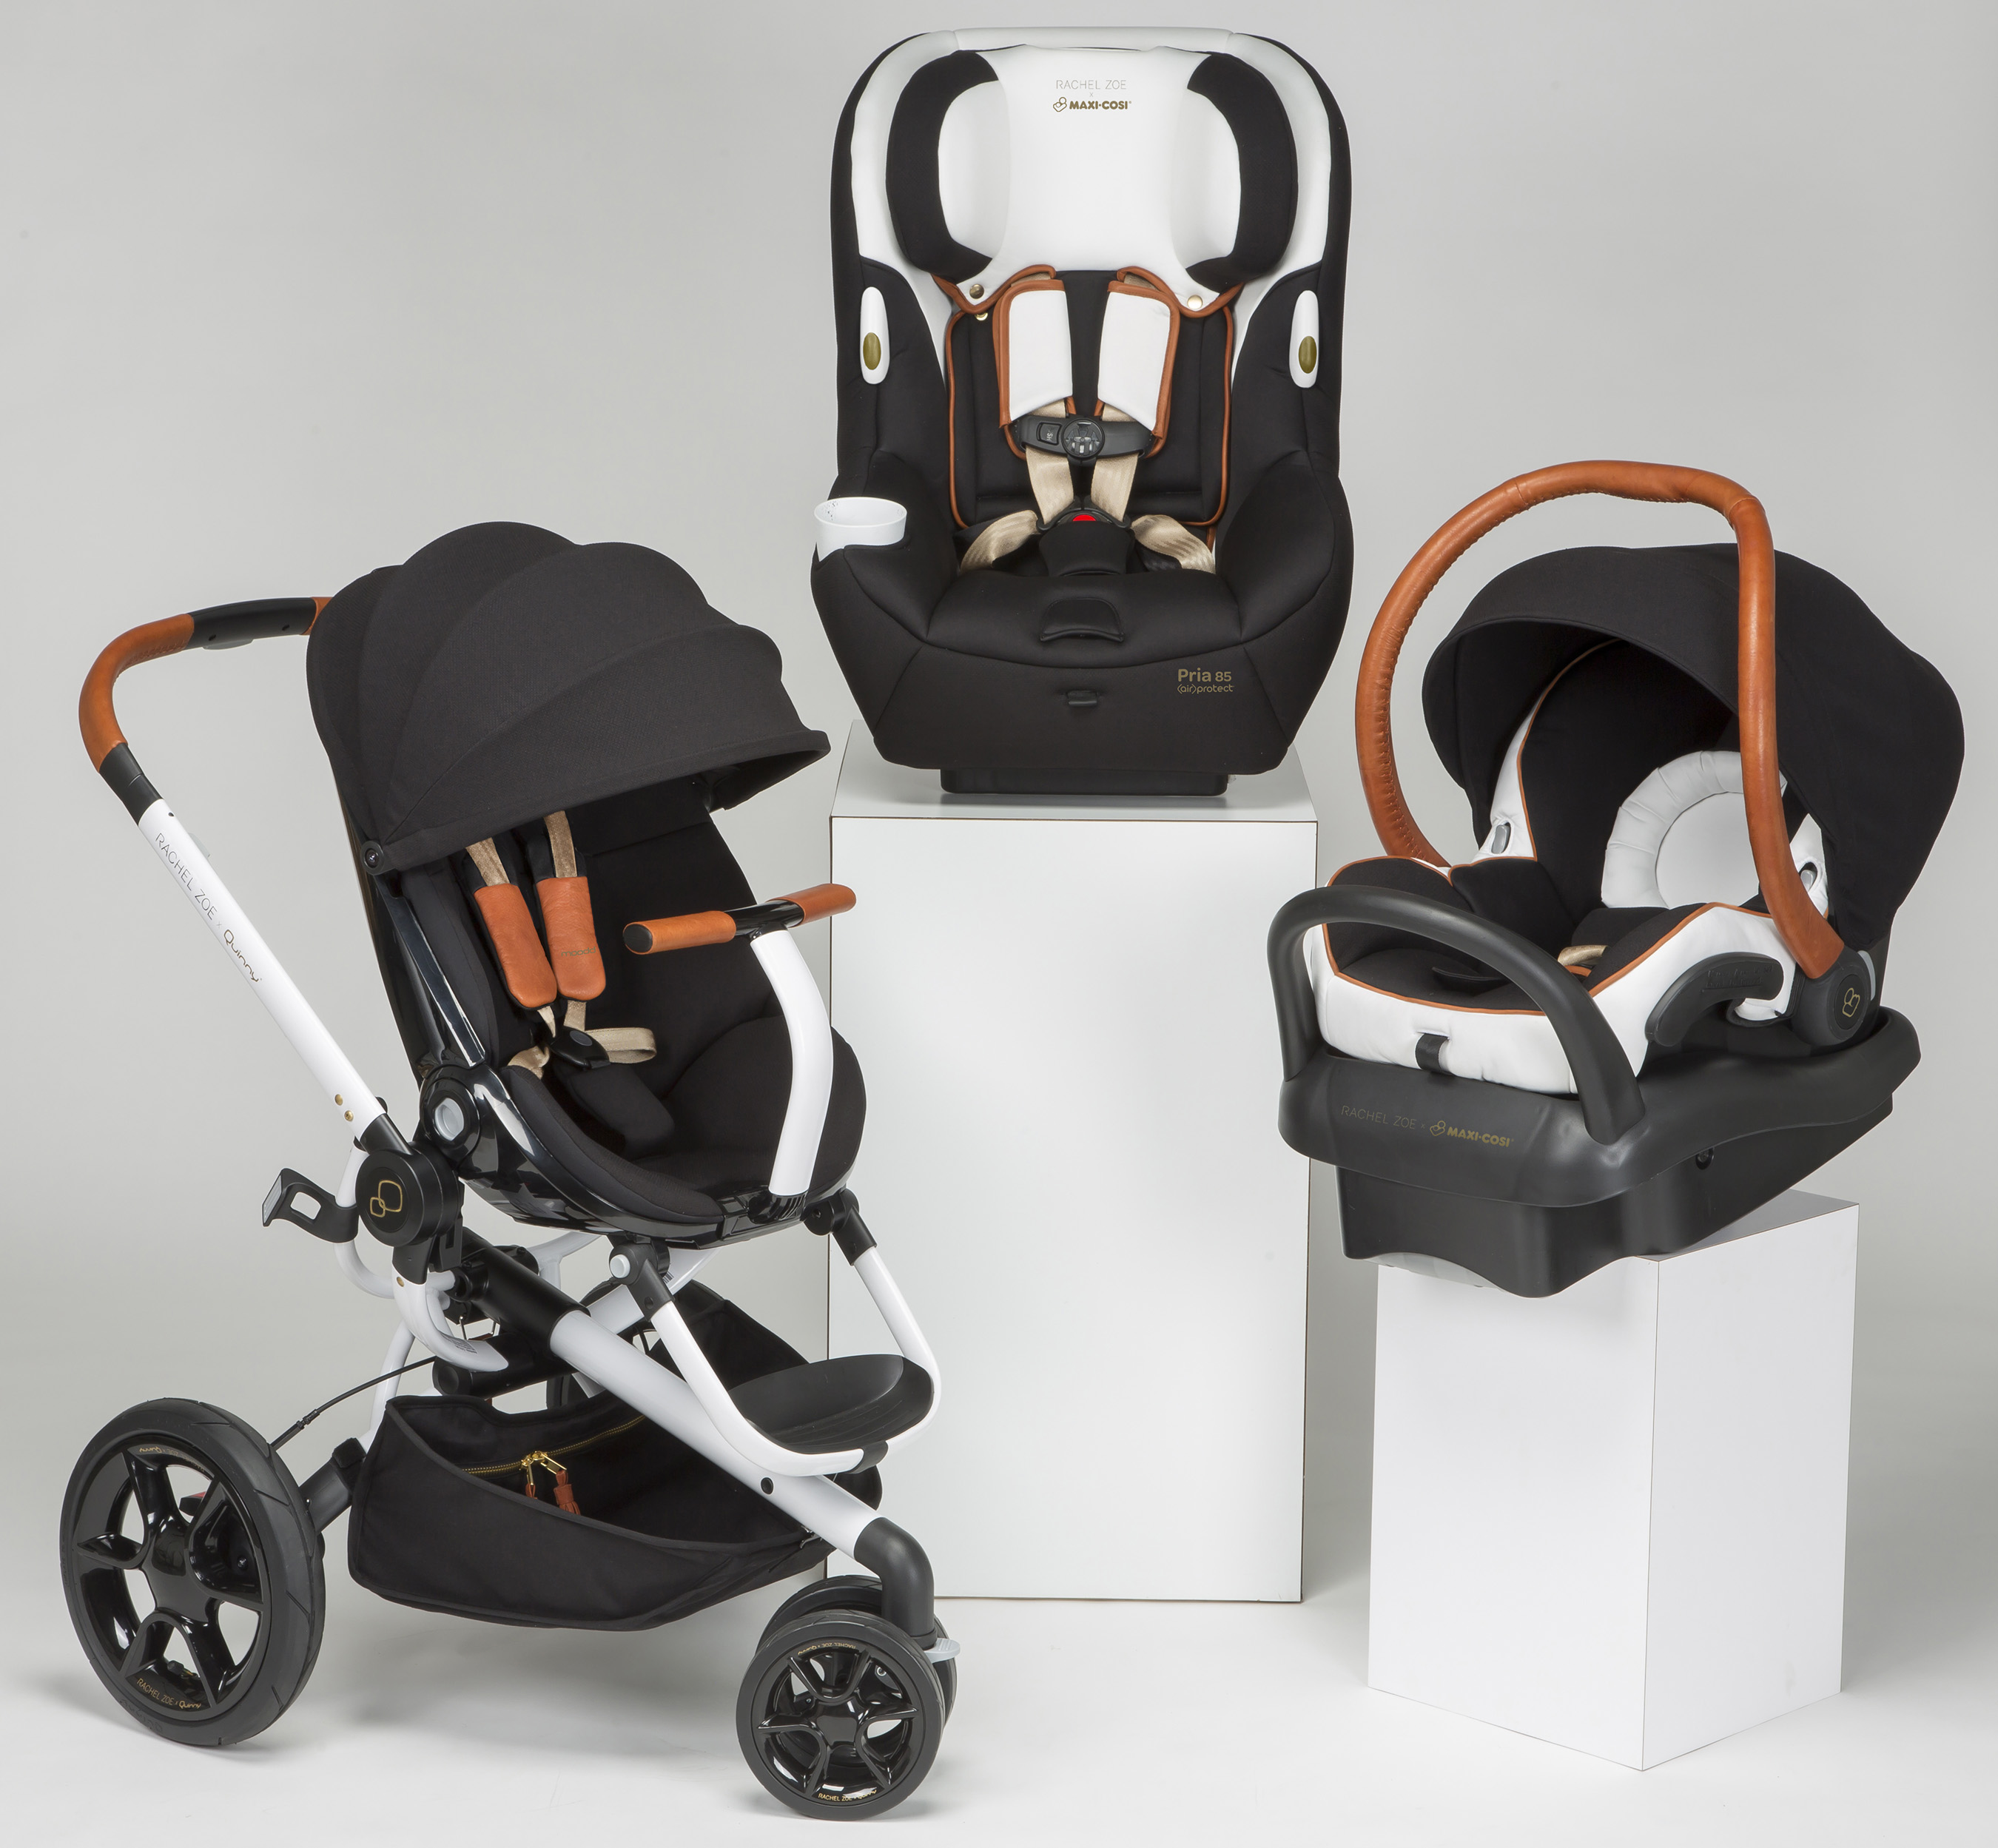 dood Binnenwaarts sleuf RACHEL ZOE x QUINNY AND MAXI-COSI COLLECTION POISED TO MAKE A POWERFUL  FASHION STATEMENT IN STROLLERS AND CAR SEATS